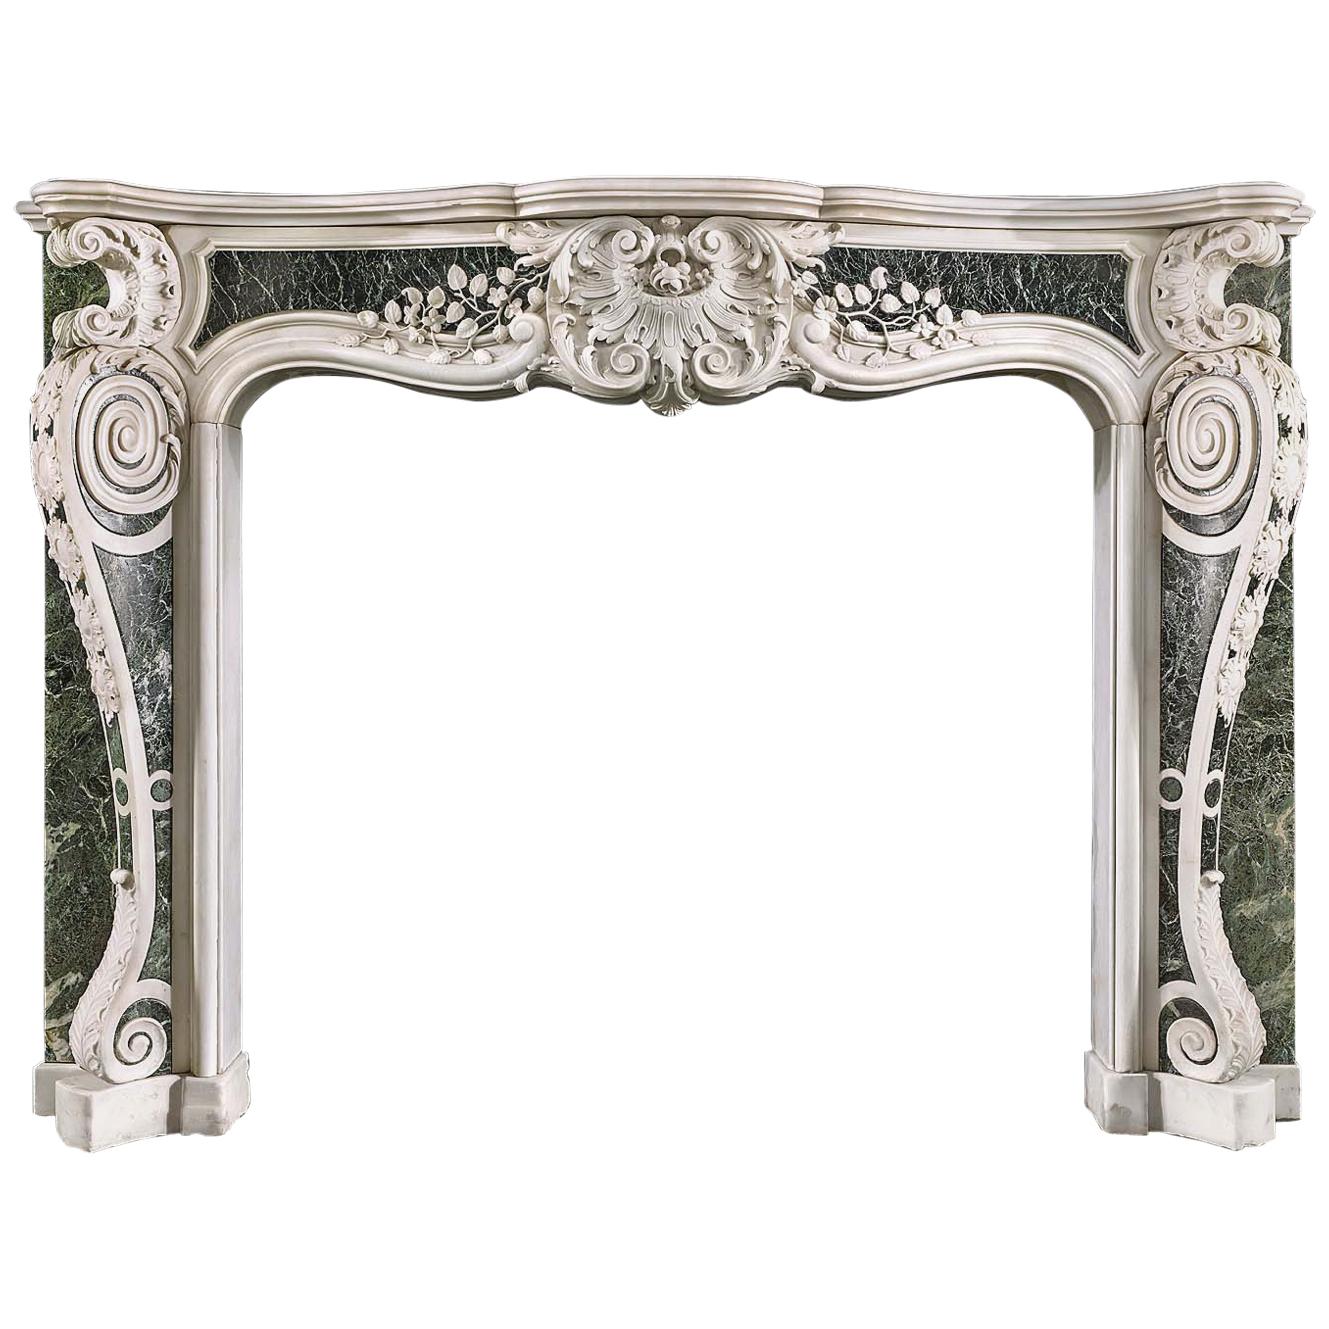 George II Rococo Chimneypiece in White Statuary and Verde Antico Marble For Sale